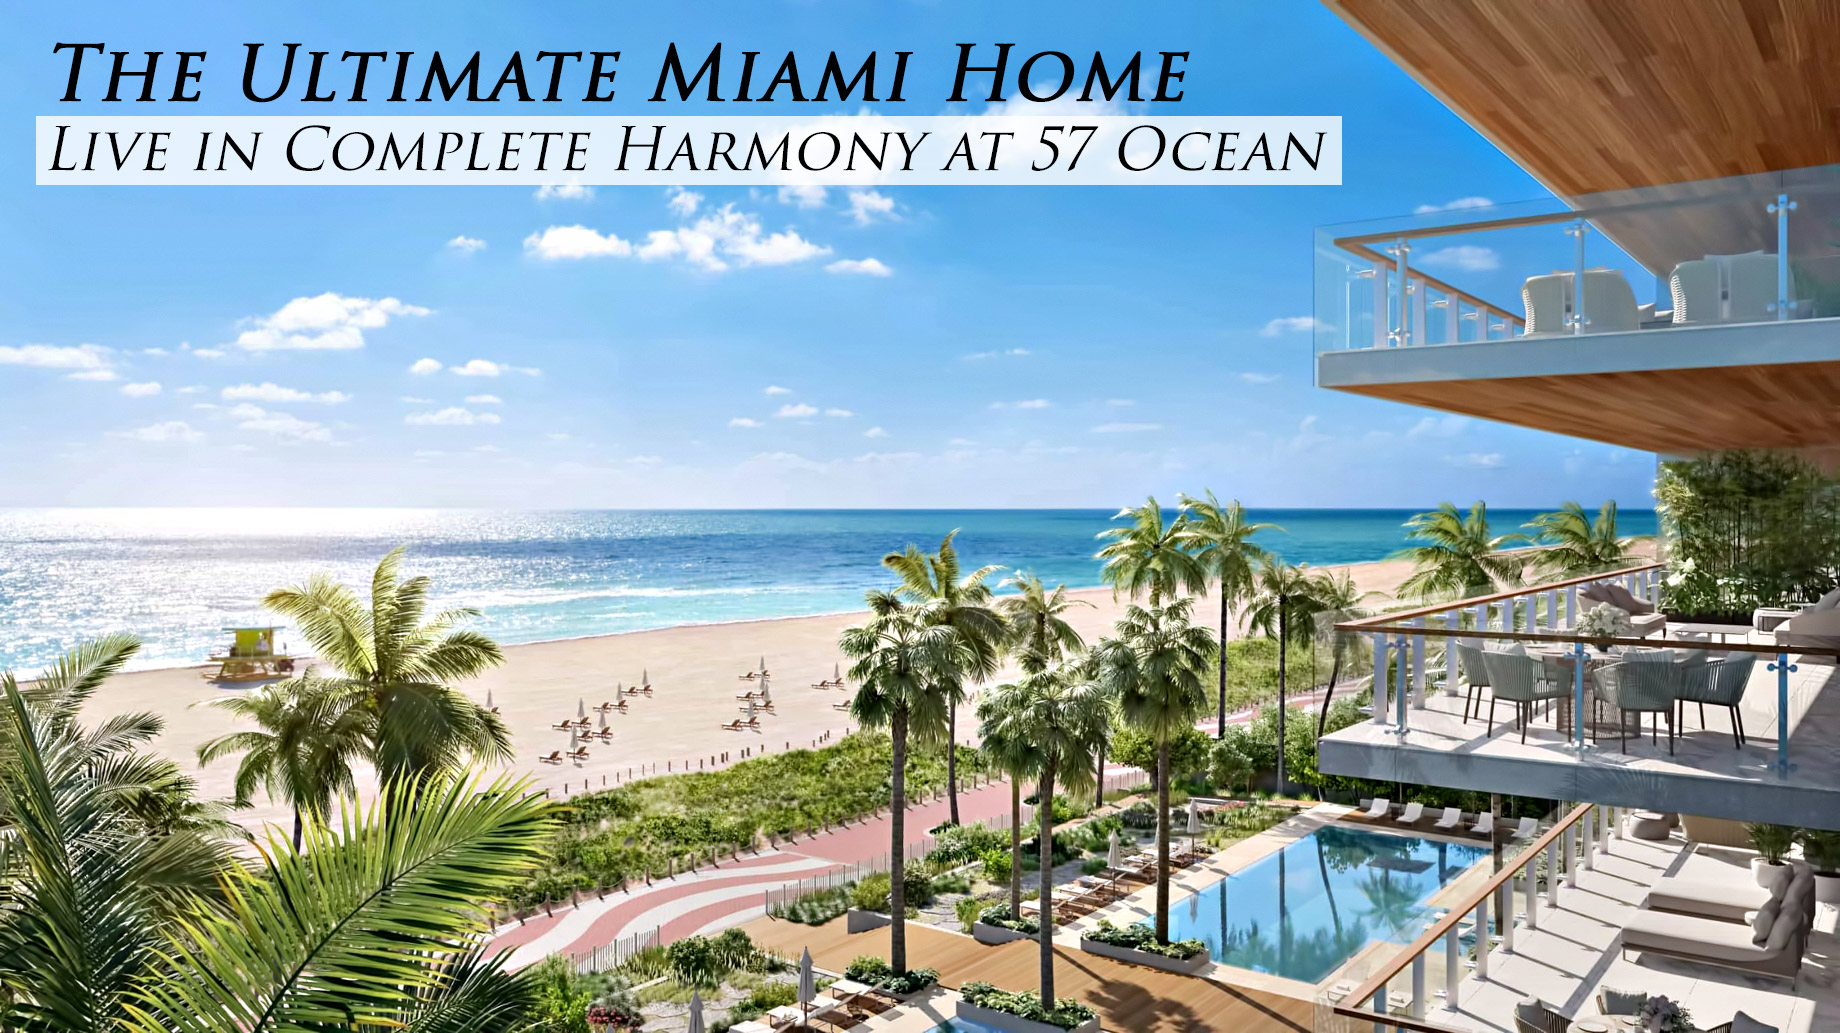 The Ultimate Miami Home - Live in Complete Harmony at 57 Ocean